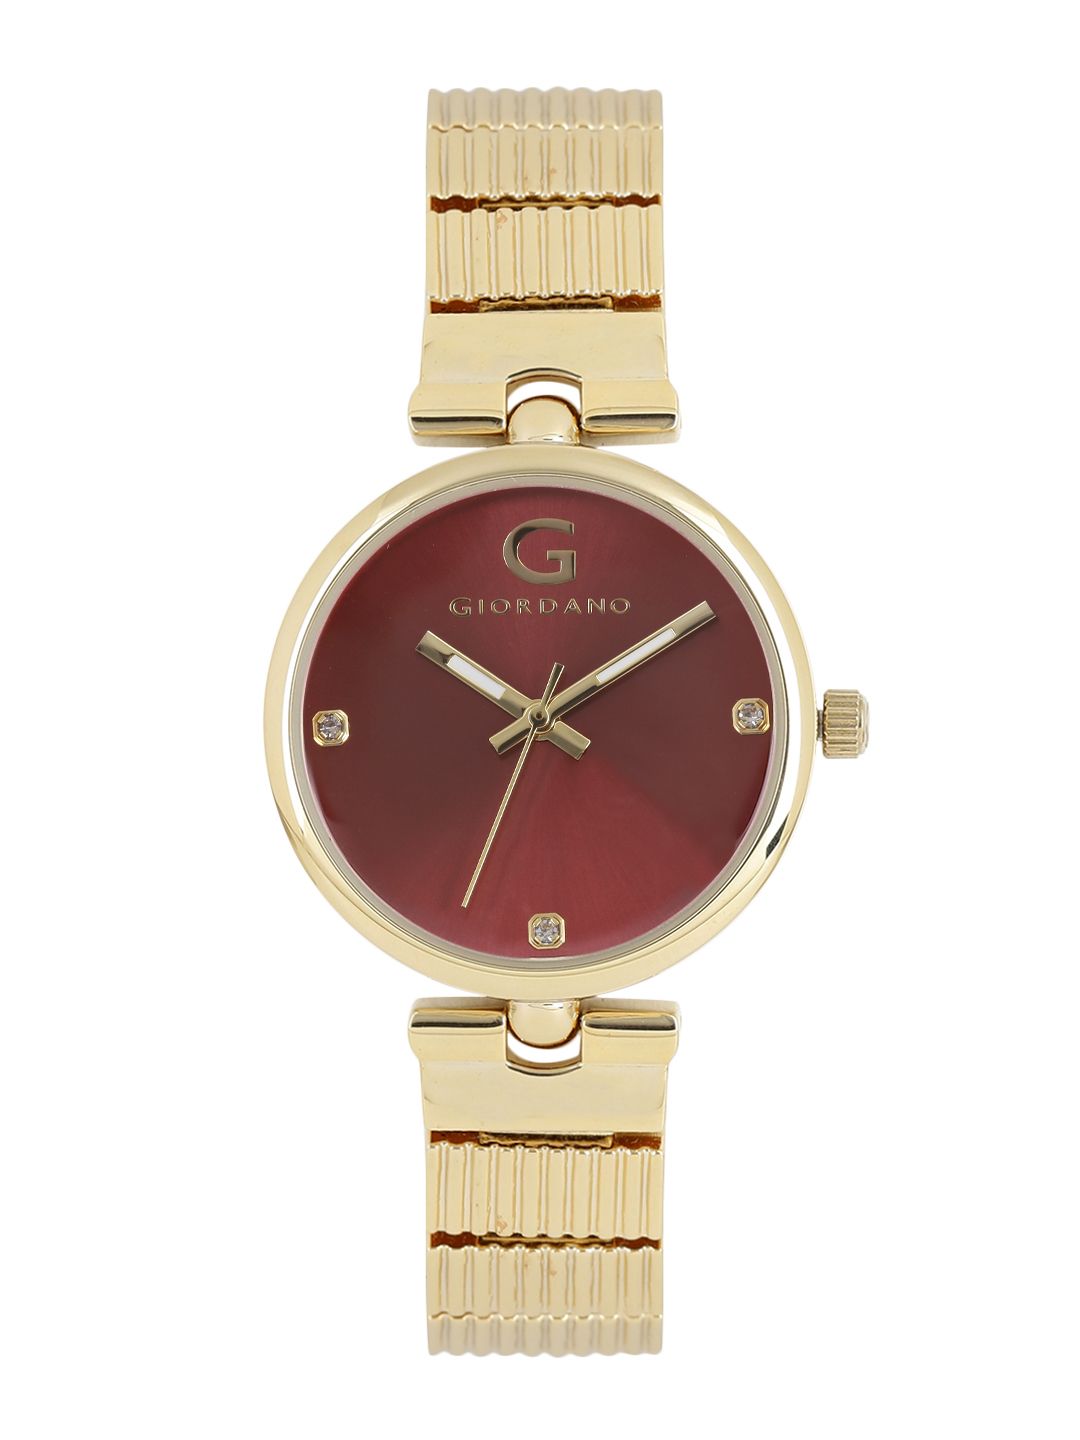 GIORDANO Women Maroon Analogue Watch A2058-22 Price in India